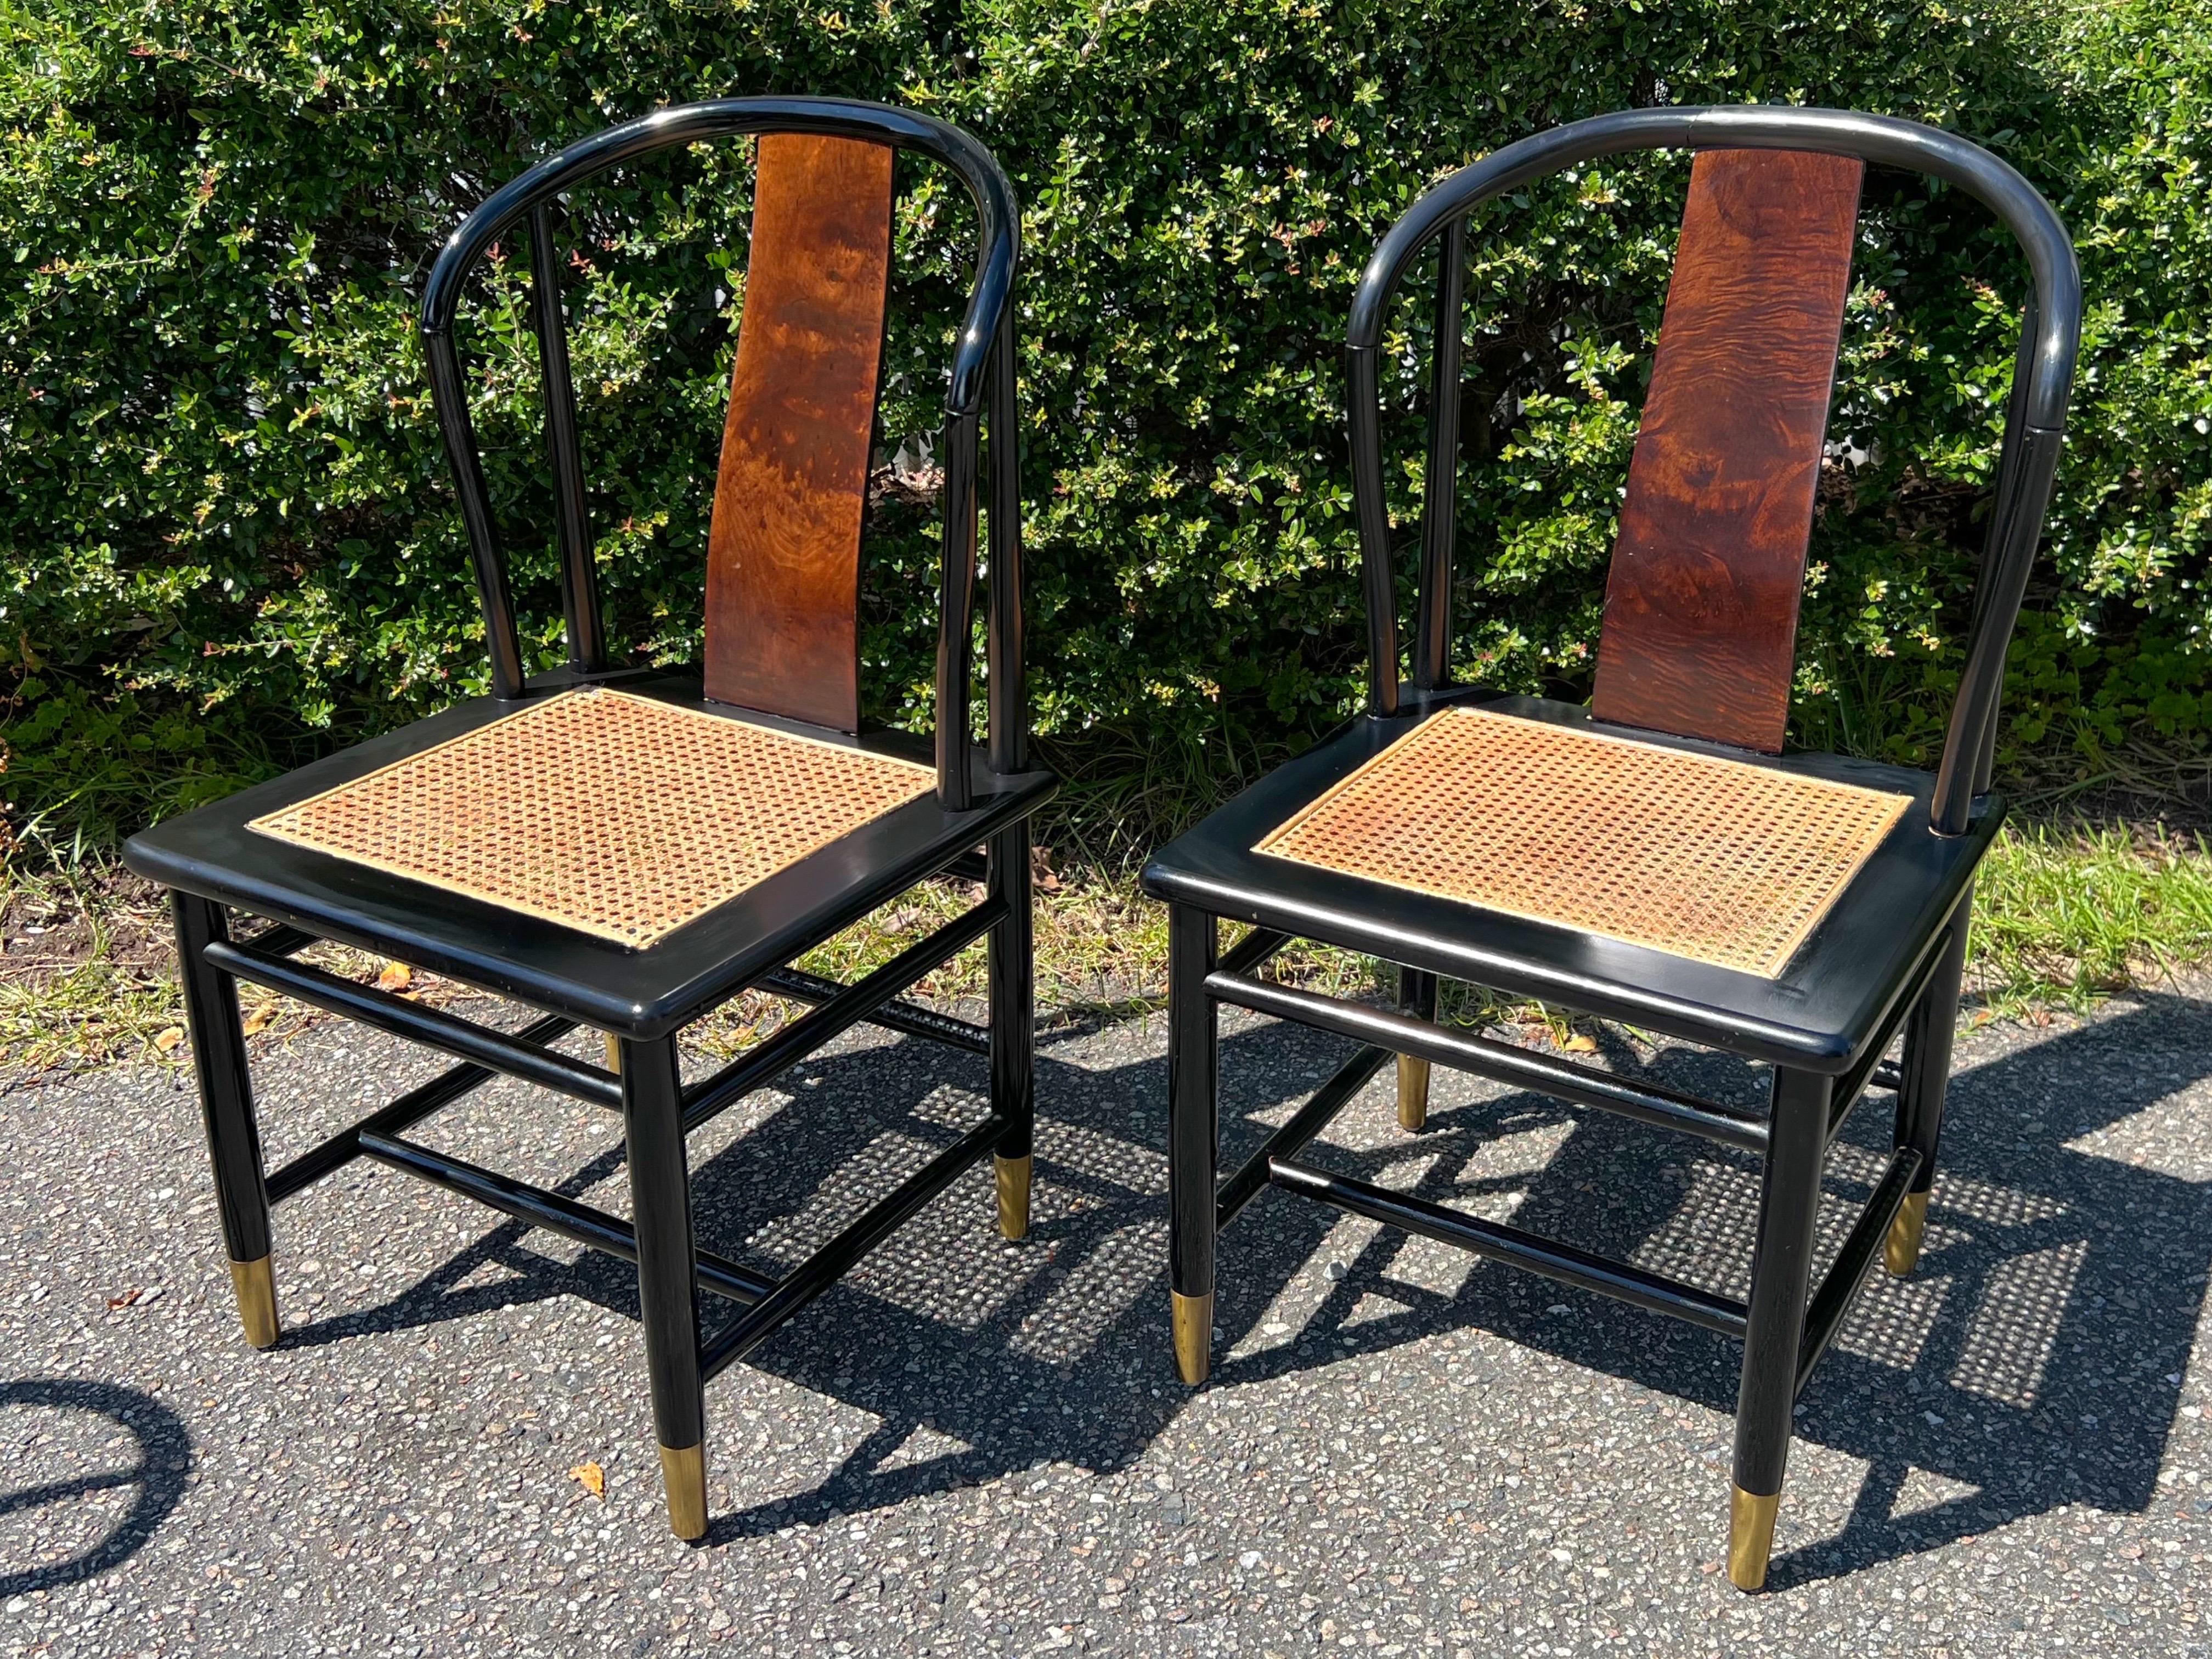 Caning Vintage Henredon “Scene 3” Black Lacquer and Burl Dining Chairs - a Set of 4